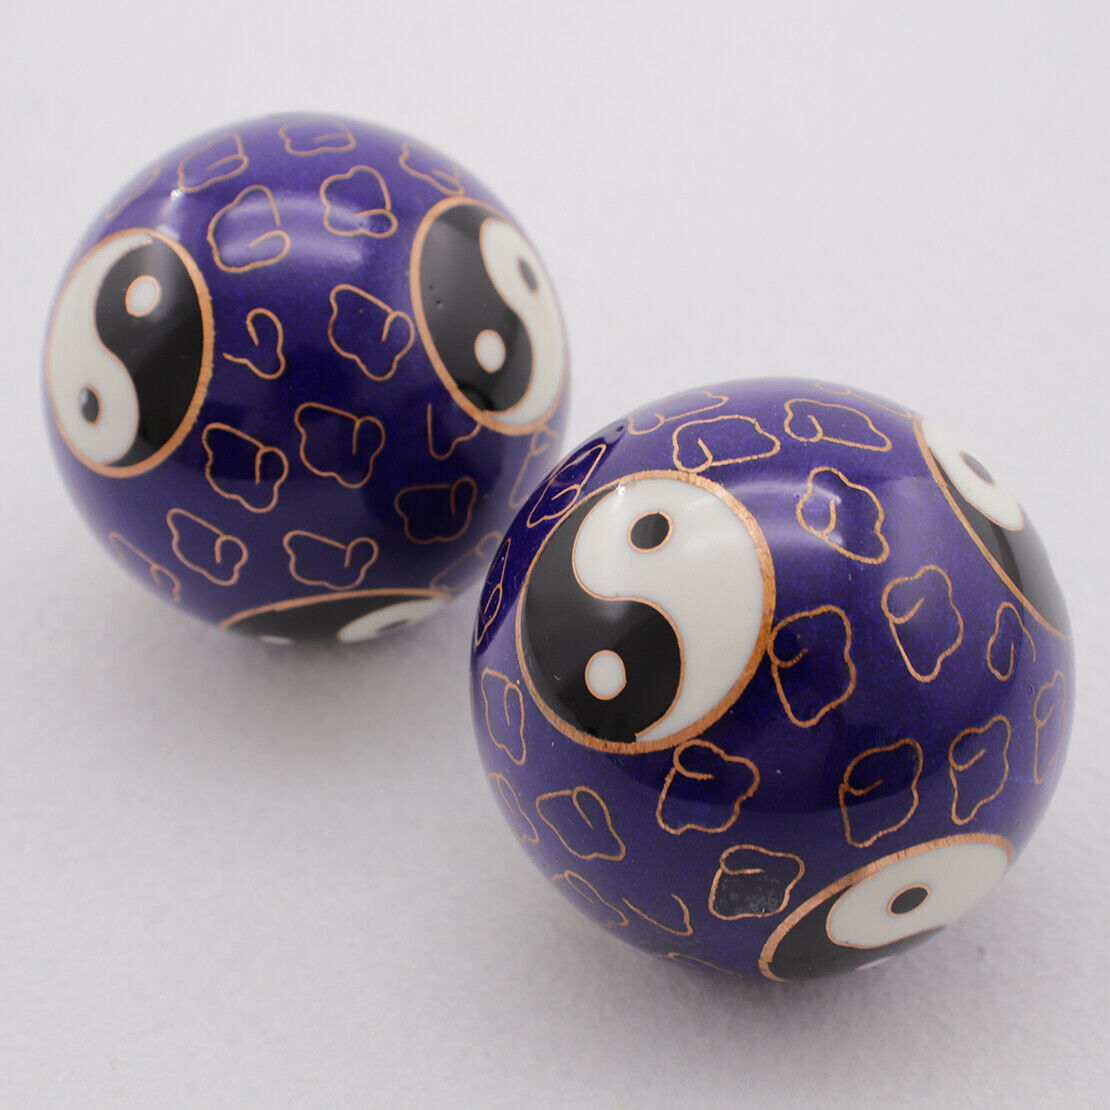 2pcs 50mm Healthy Exercise Relaxation Therapy Yin Yang Chinese Baoding Balls